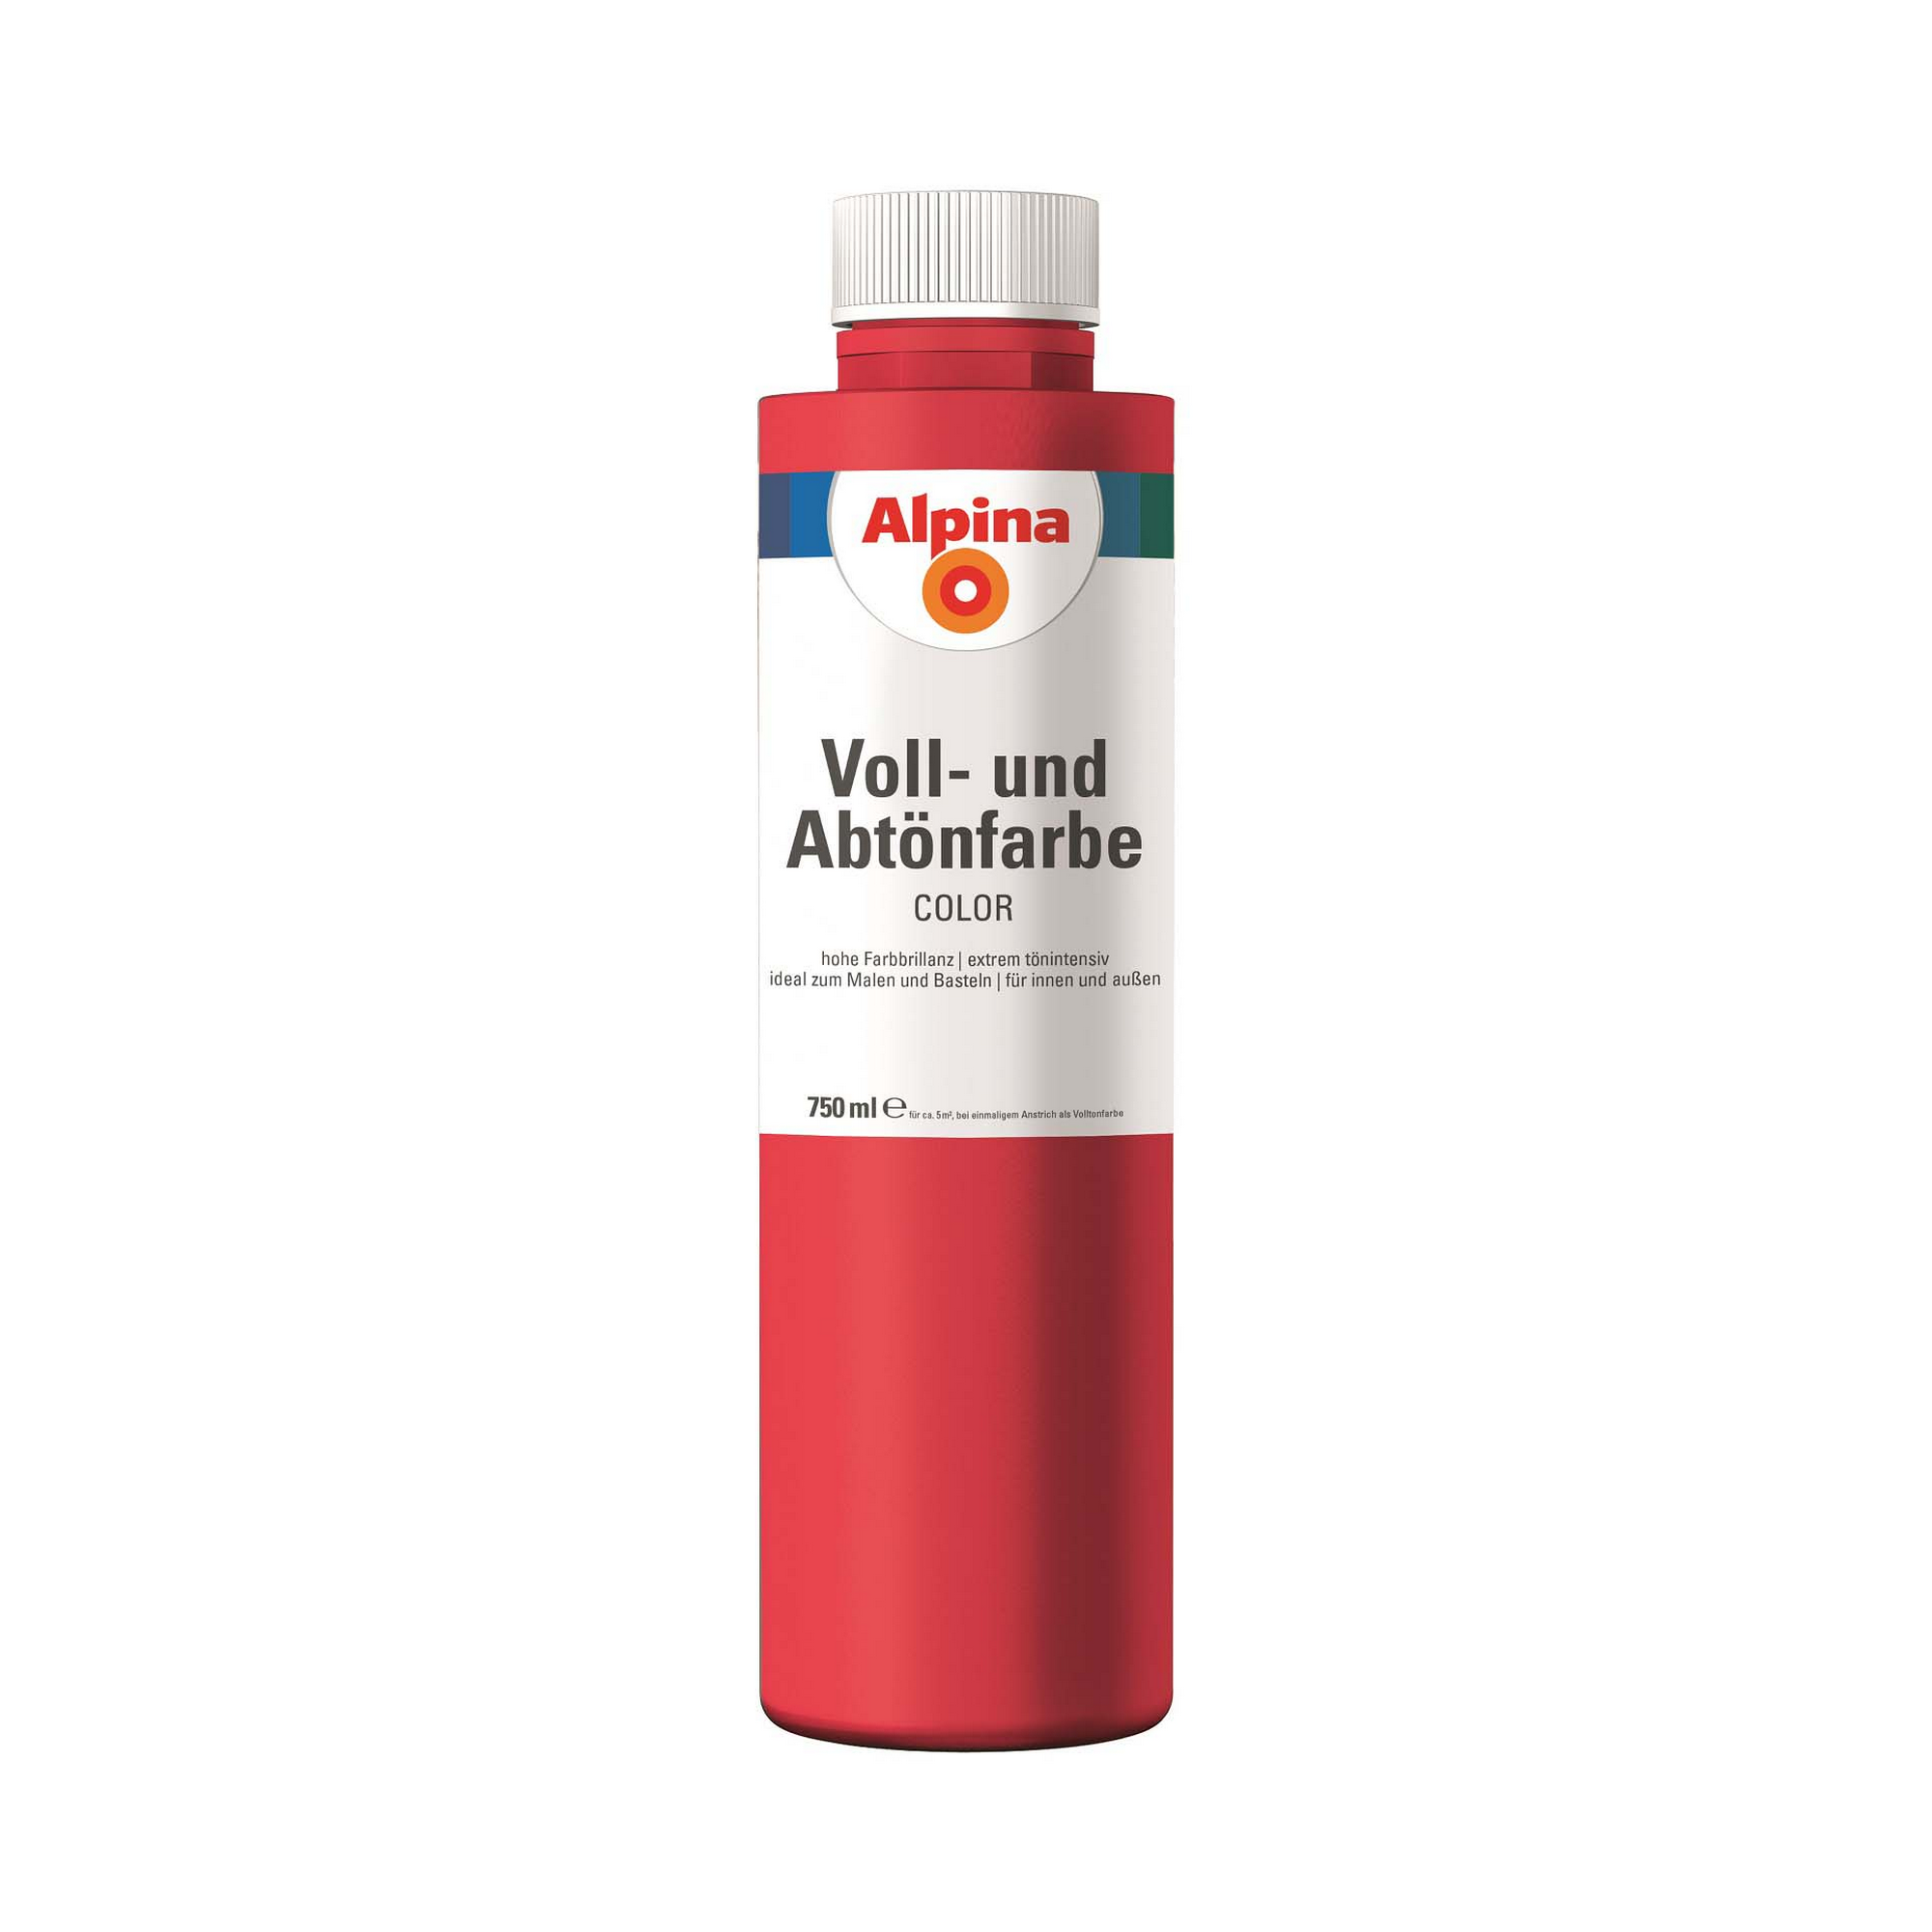 Voll- und Abtönfarbe 'Fire Red' feuerrot 750 ml + product picture